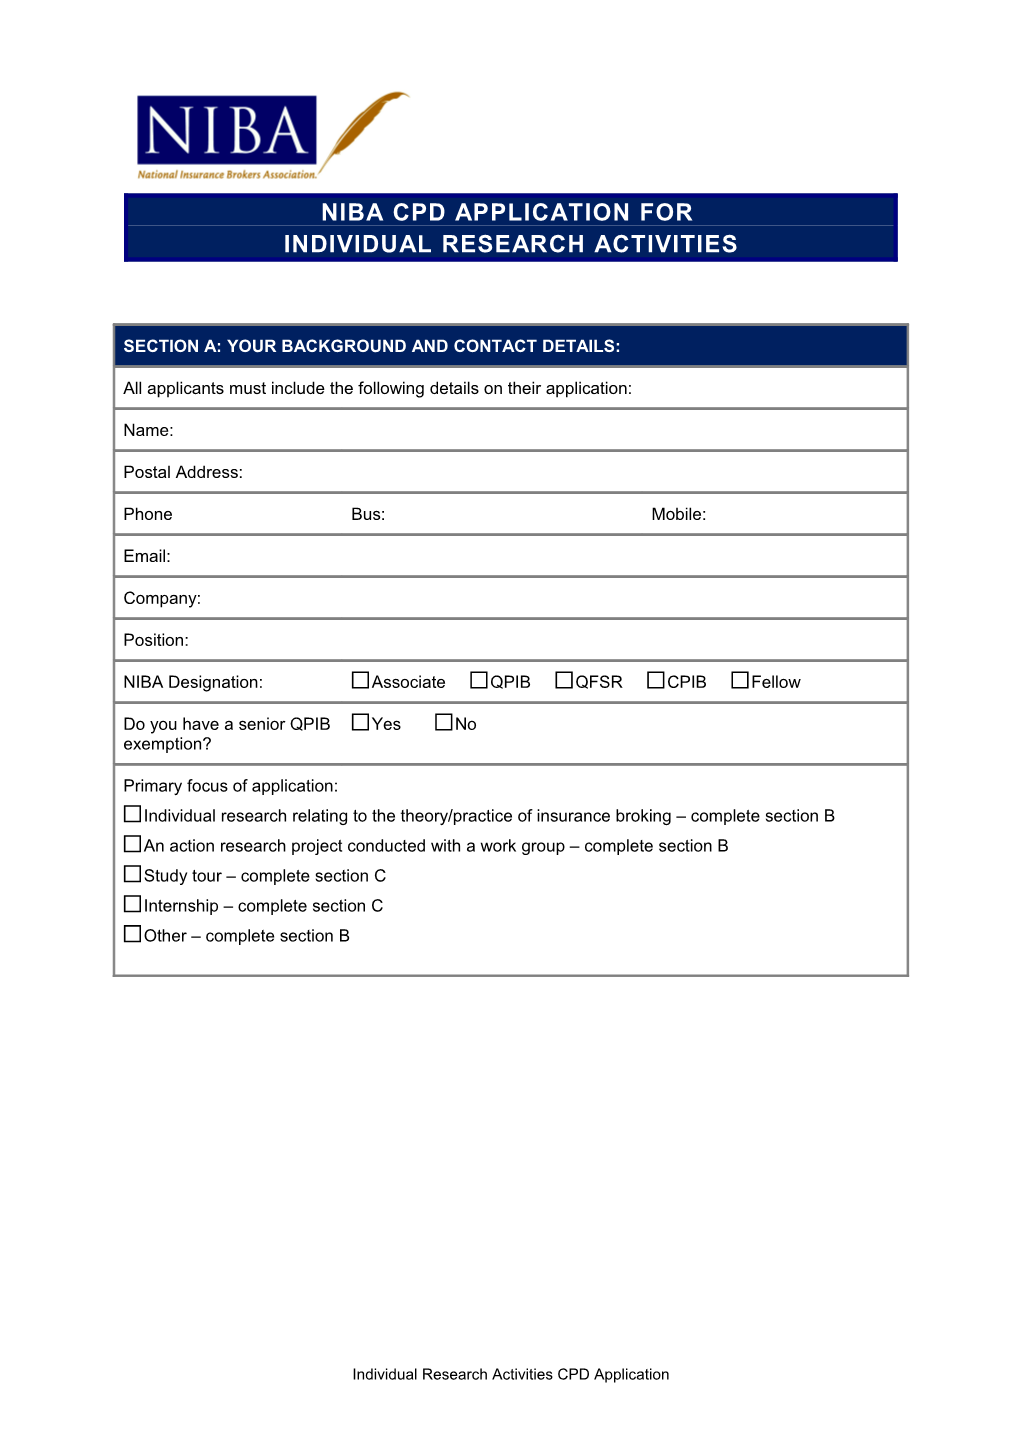 NIBA CPD Application For